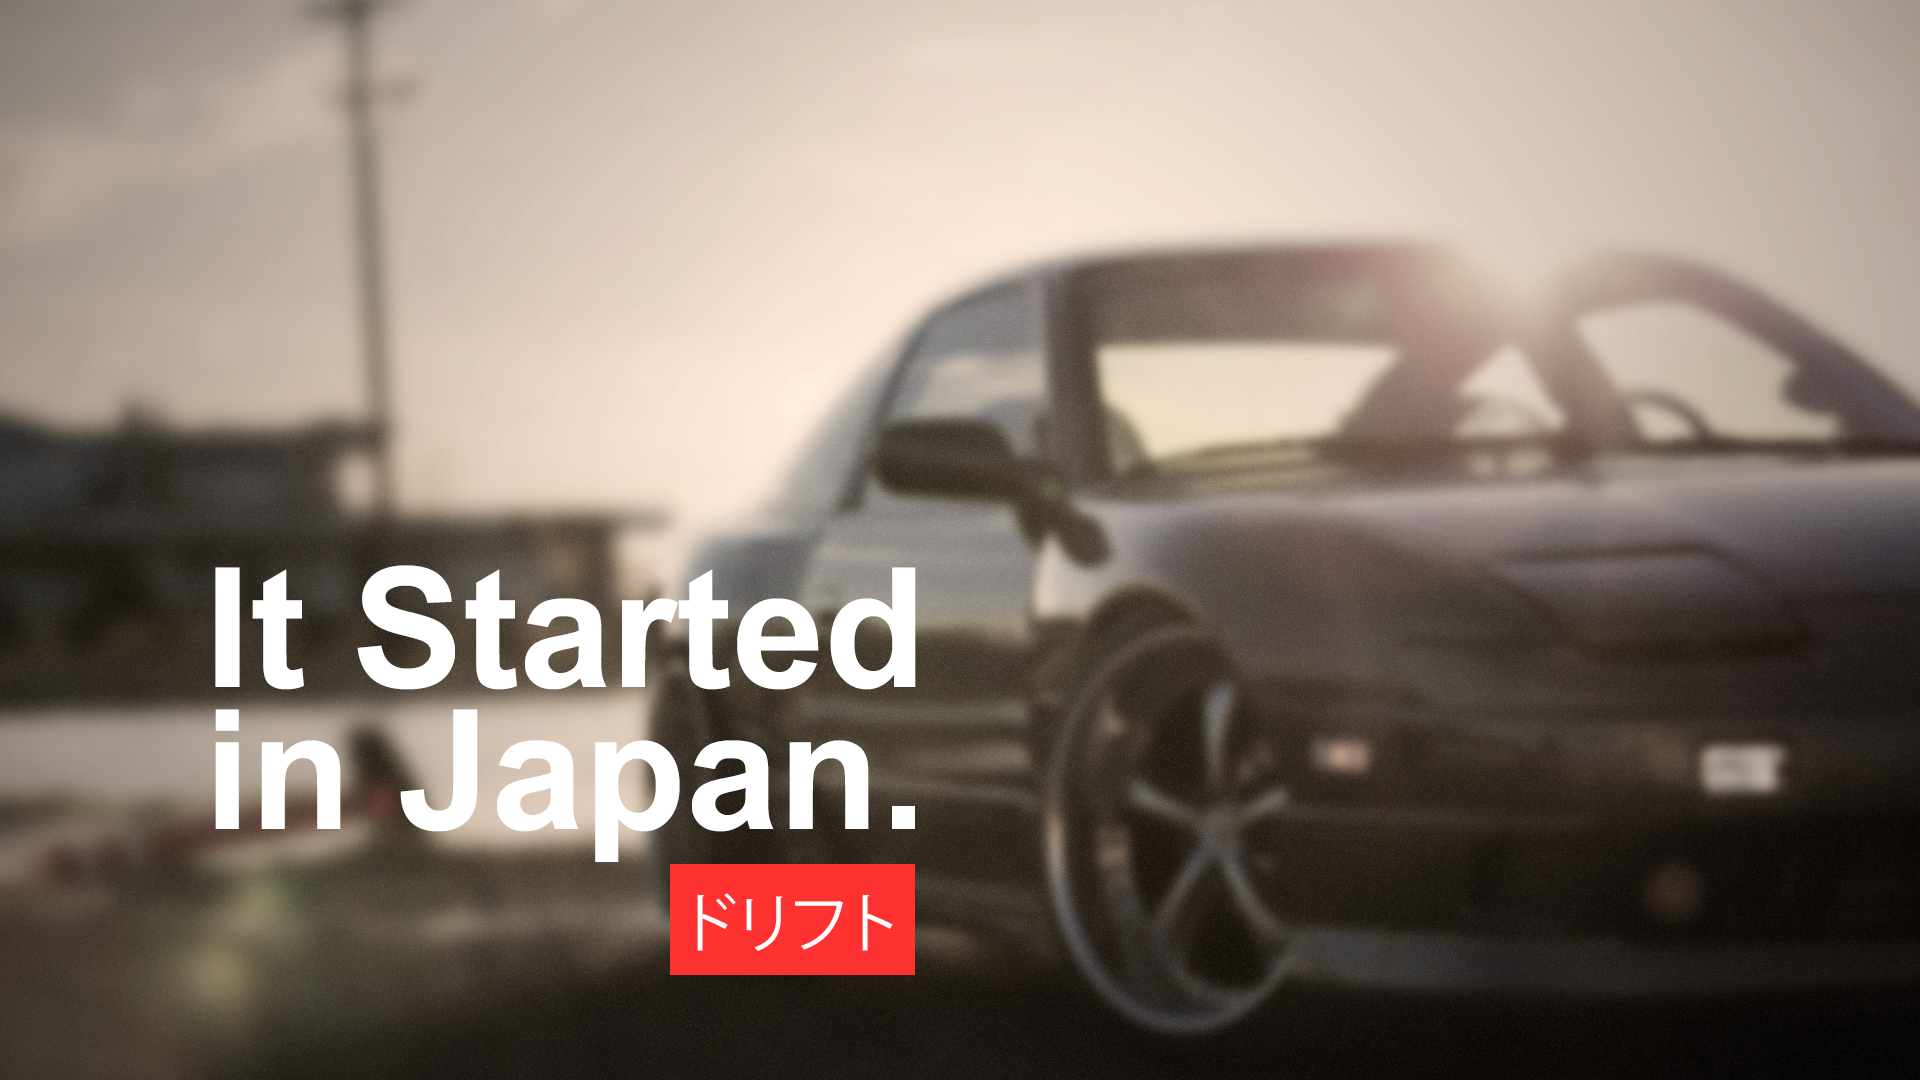 Car Japan Drift Drifting Racing Vehicle Japanese Cars Import Tuning Modified Mazda It Started In Jap 1920x1080